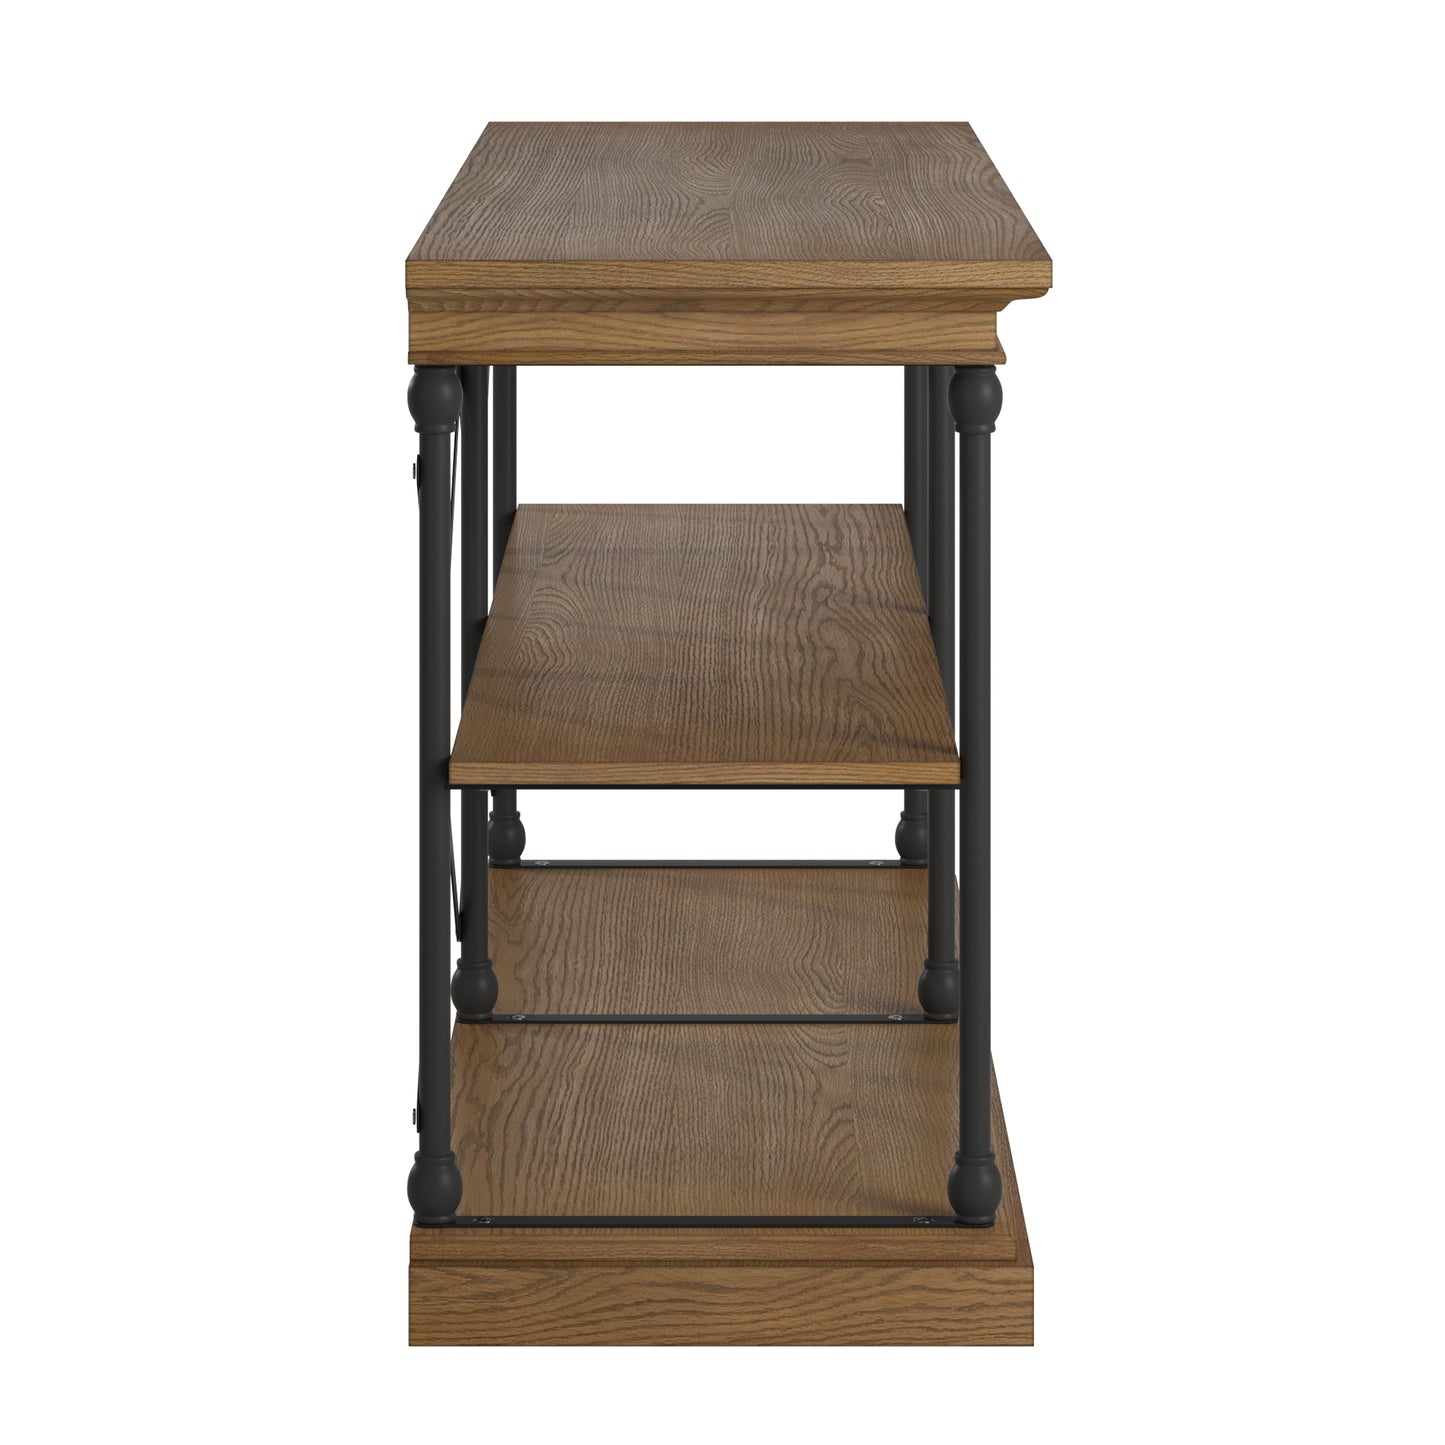 Cornice Iron and Wood Entryway Console Table - Brown Finish